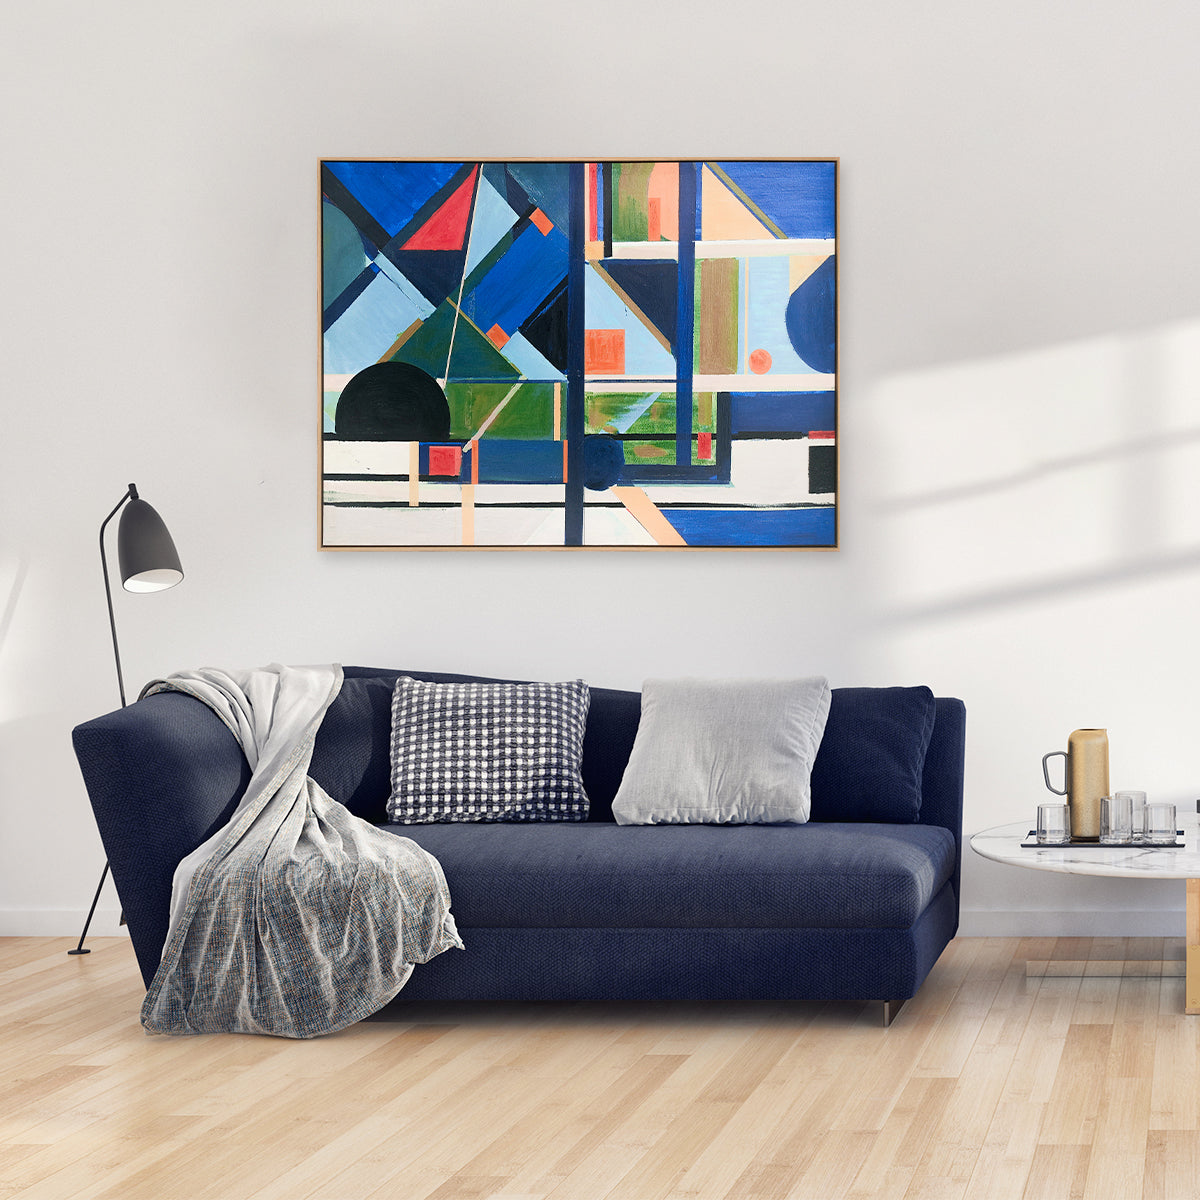 Abstract textured wall art affordable oil painting framed colourful blue city landscape in living room